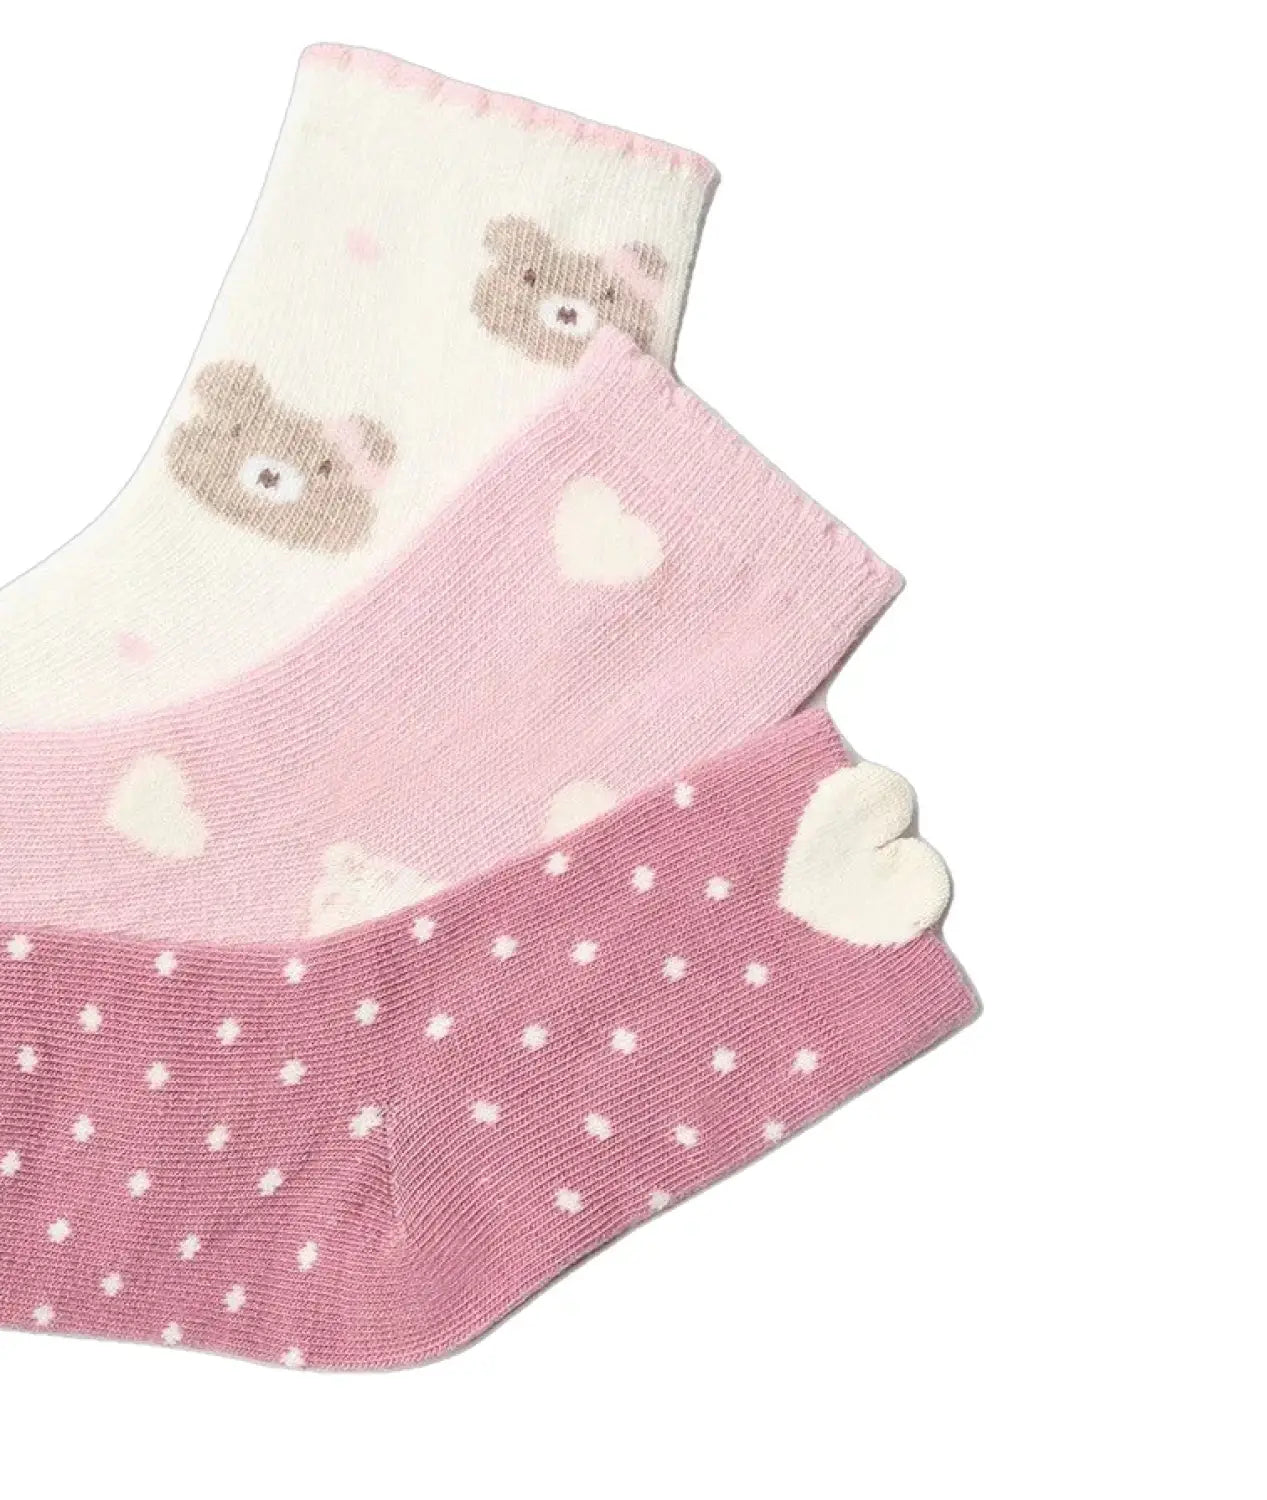 Mayoral Baby Sock - 3 Pack, Rose, top view up close 